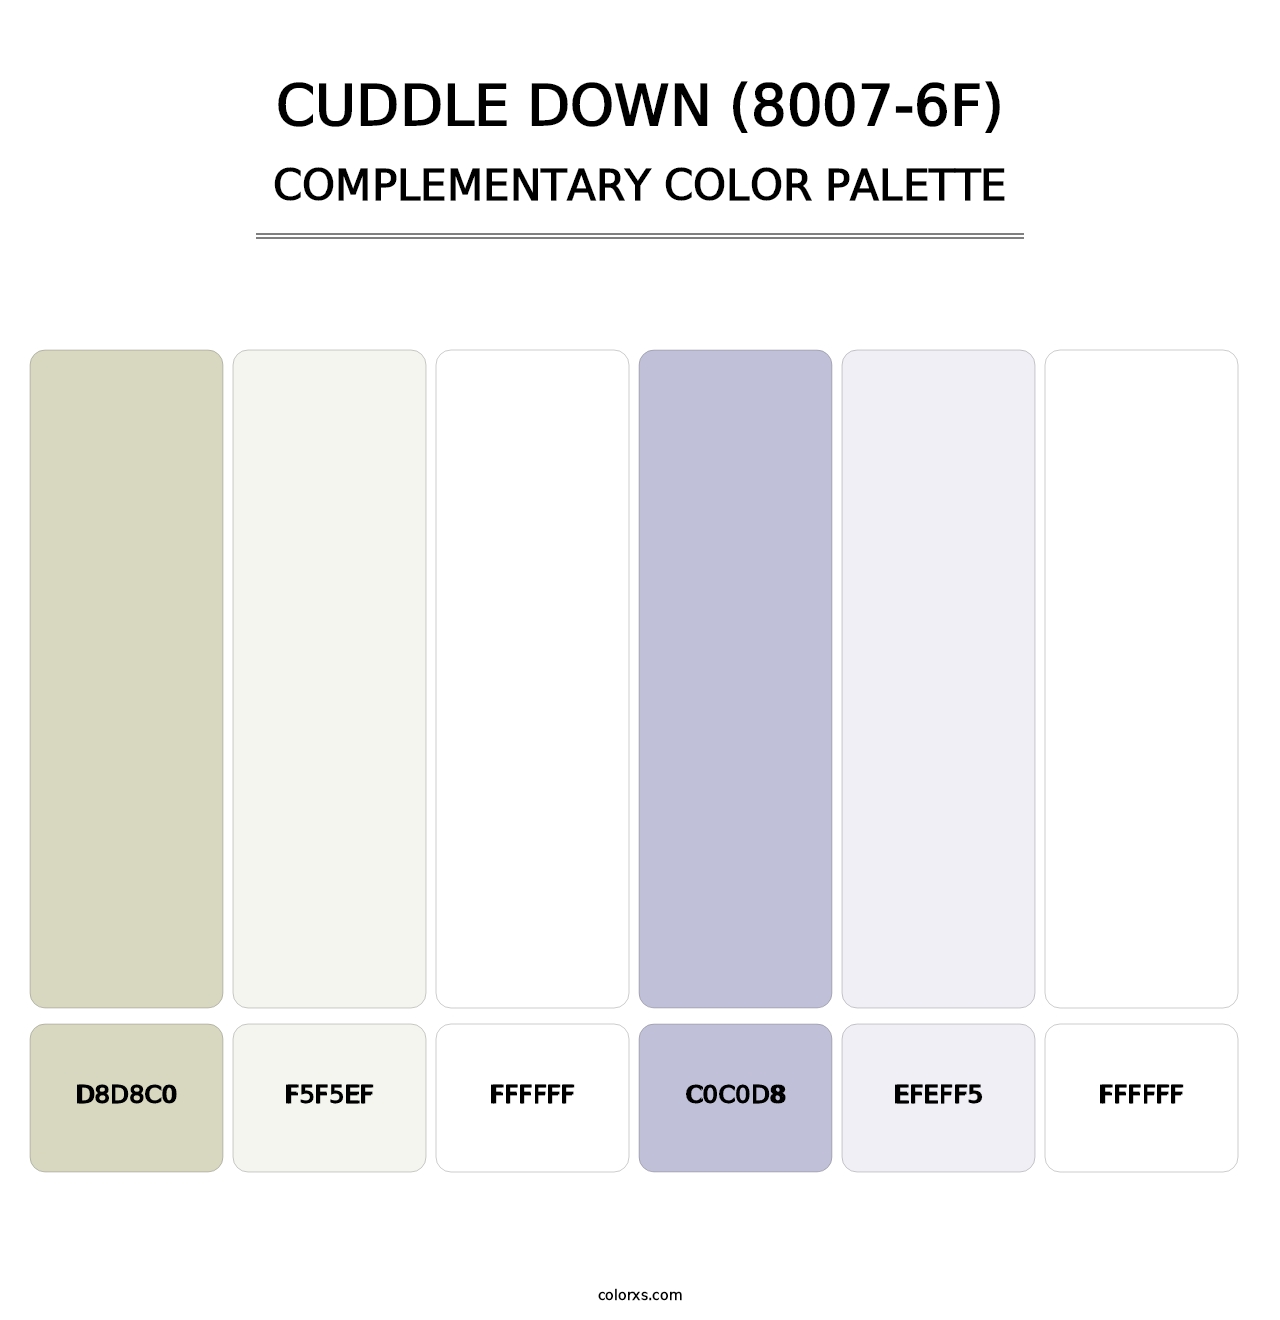 Cuddle Down (8007-6F) - Complementary Color Palette